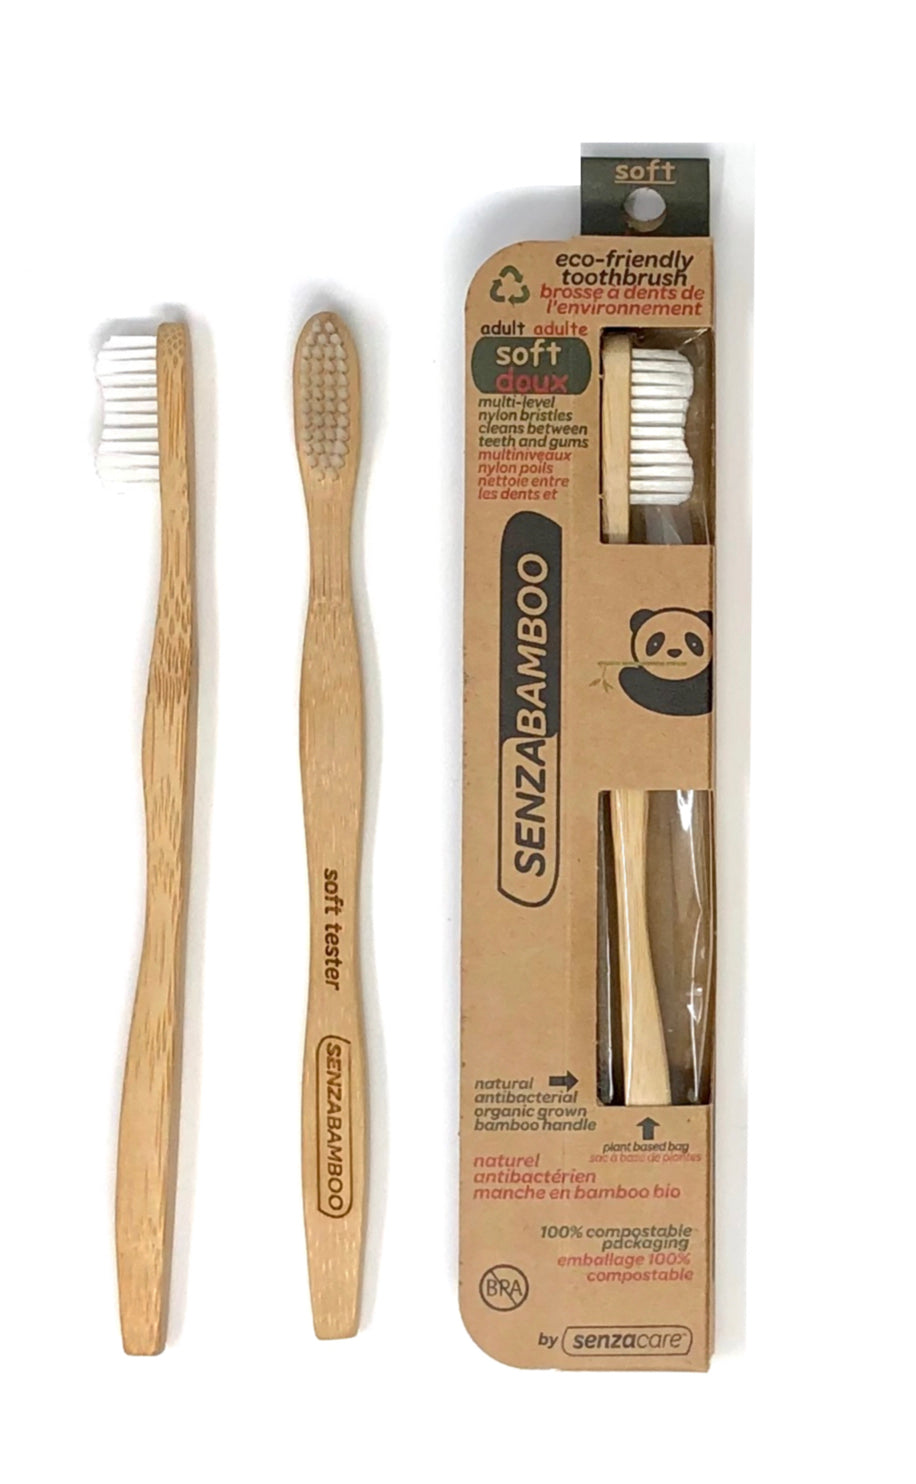 Eco-Friendly Bamboo Toothbrush (soft adult) - Senzacare